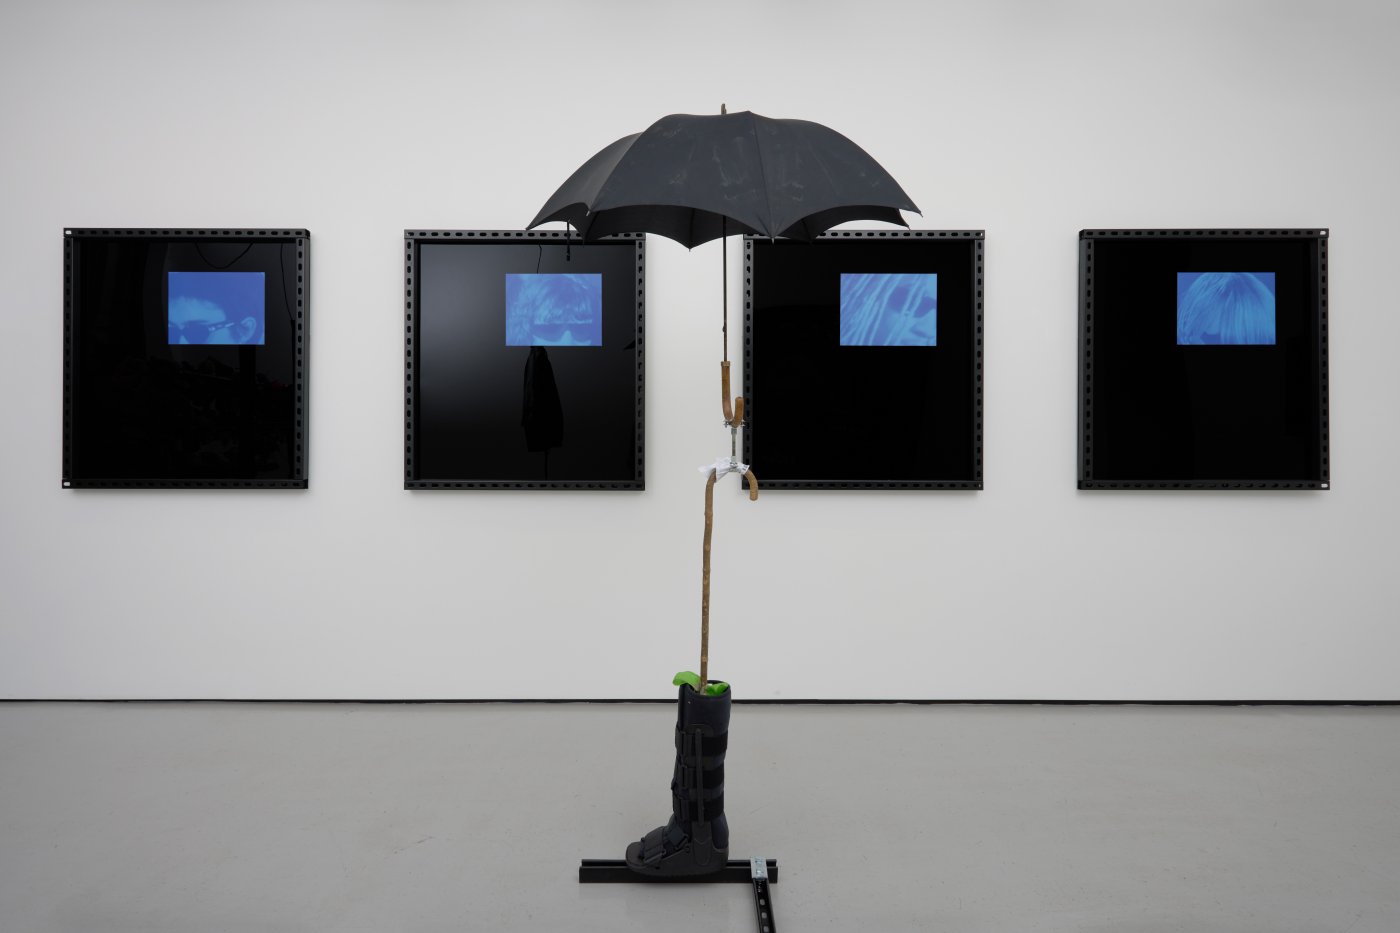 Installation image for Simeon Barclay: At Home, Everywhere and Nowhere, at Workplace